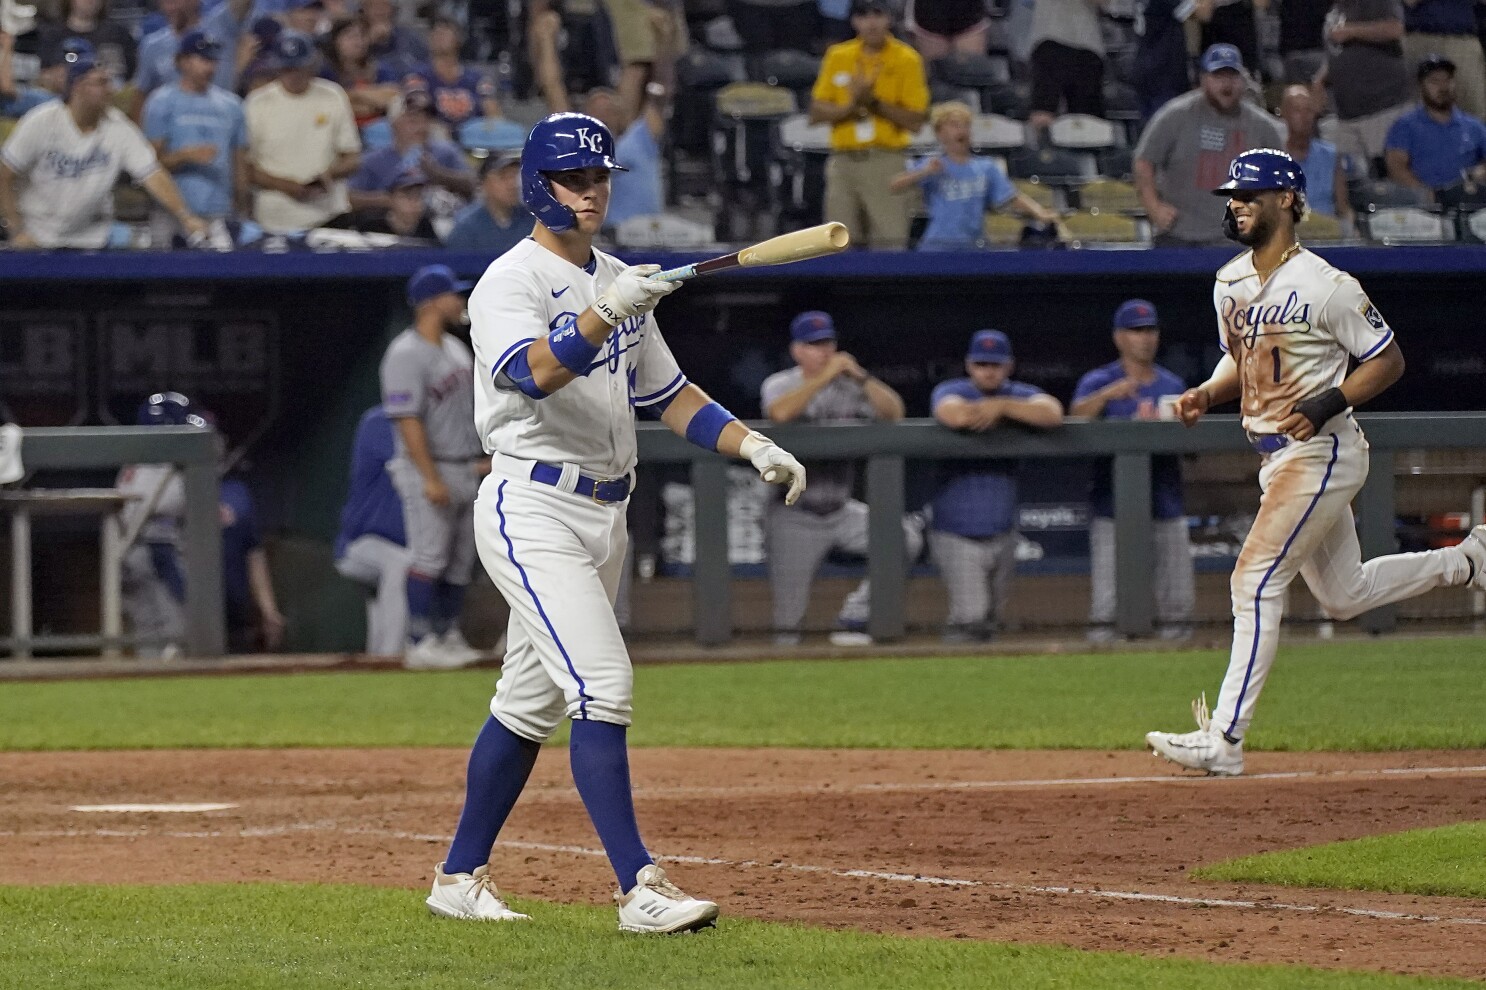 Five-run first holds up for Royals in 6-4 win over the Dodgers